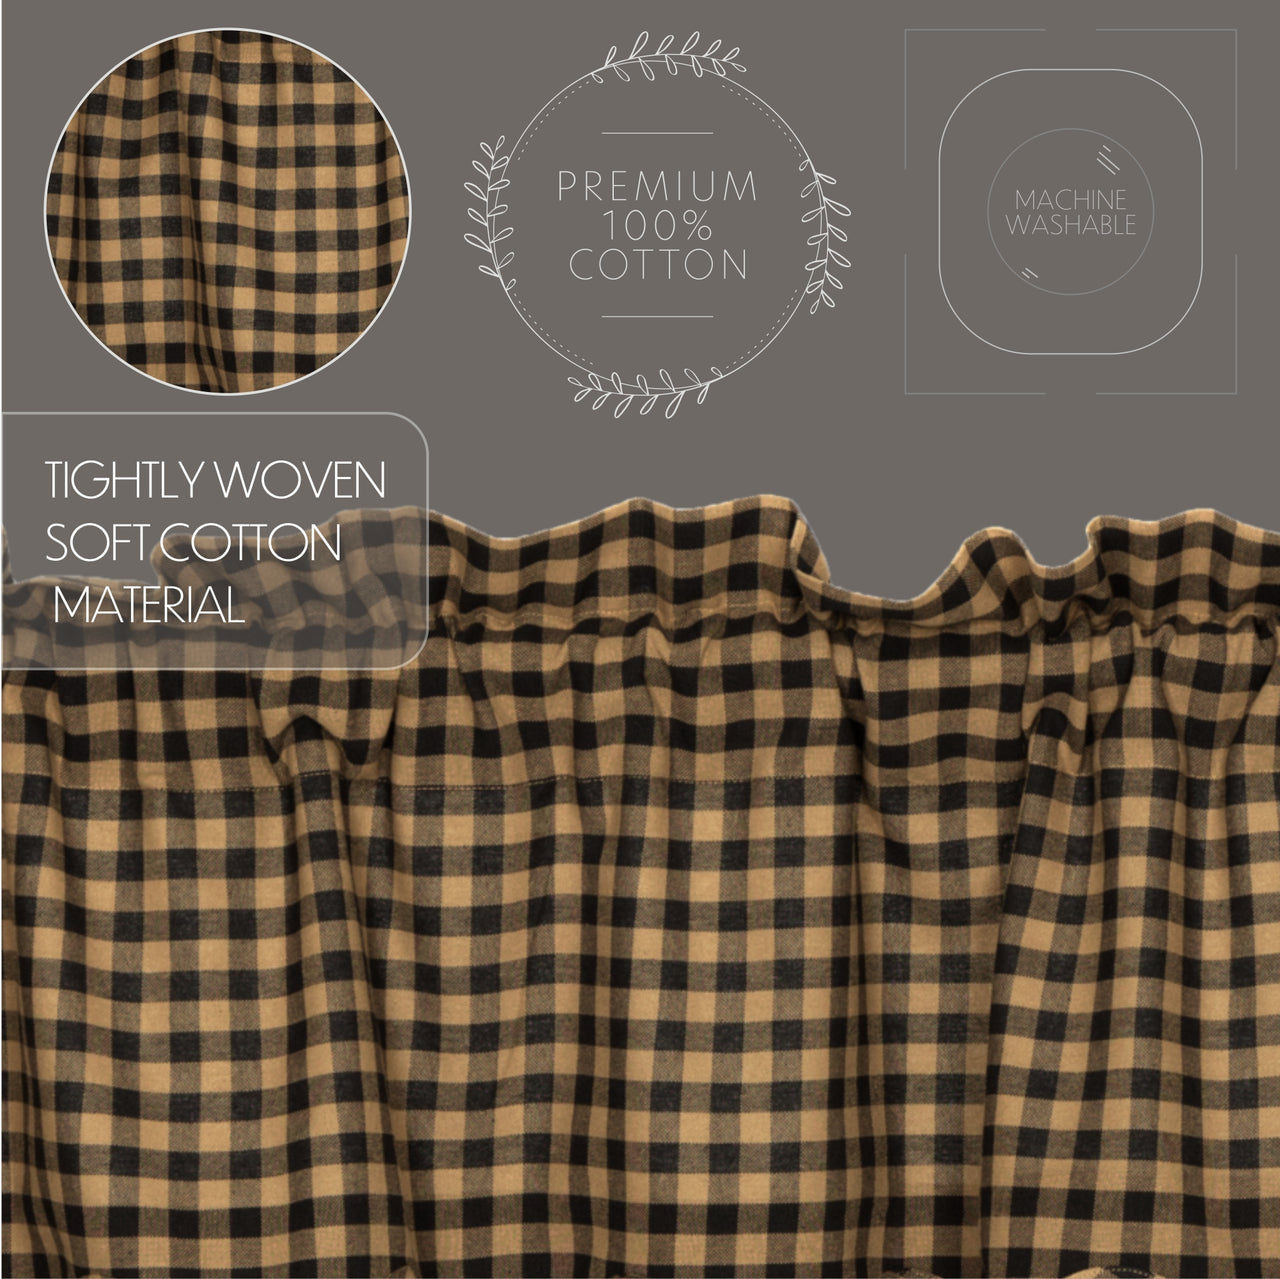 Black Check Scalloped Valance Curtain 16x60 VHC Brands